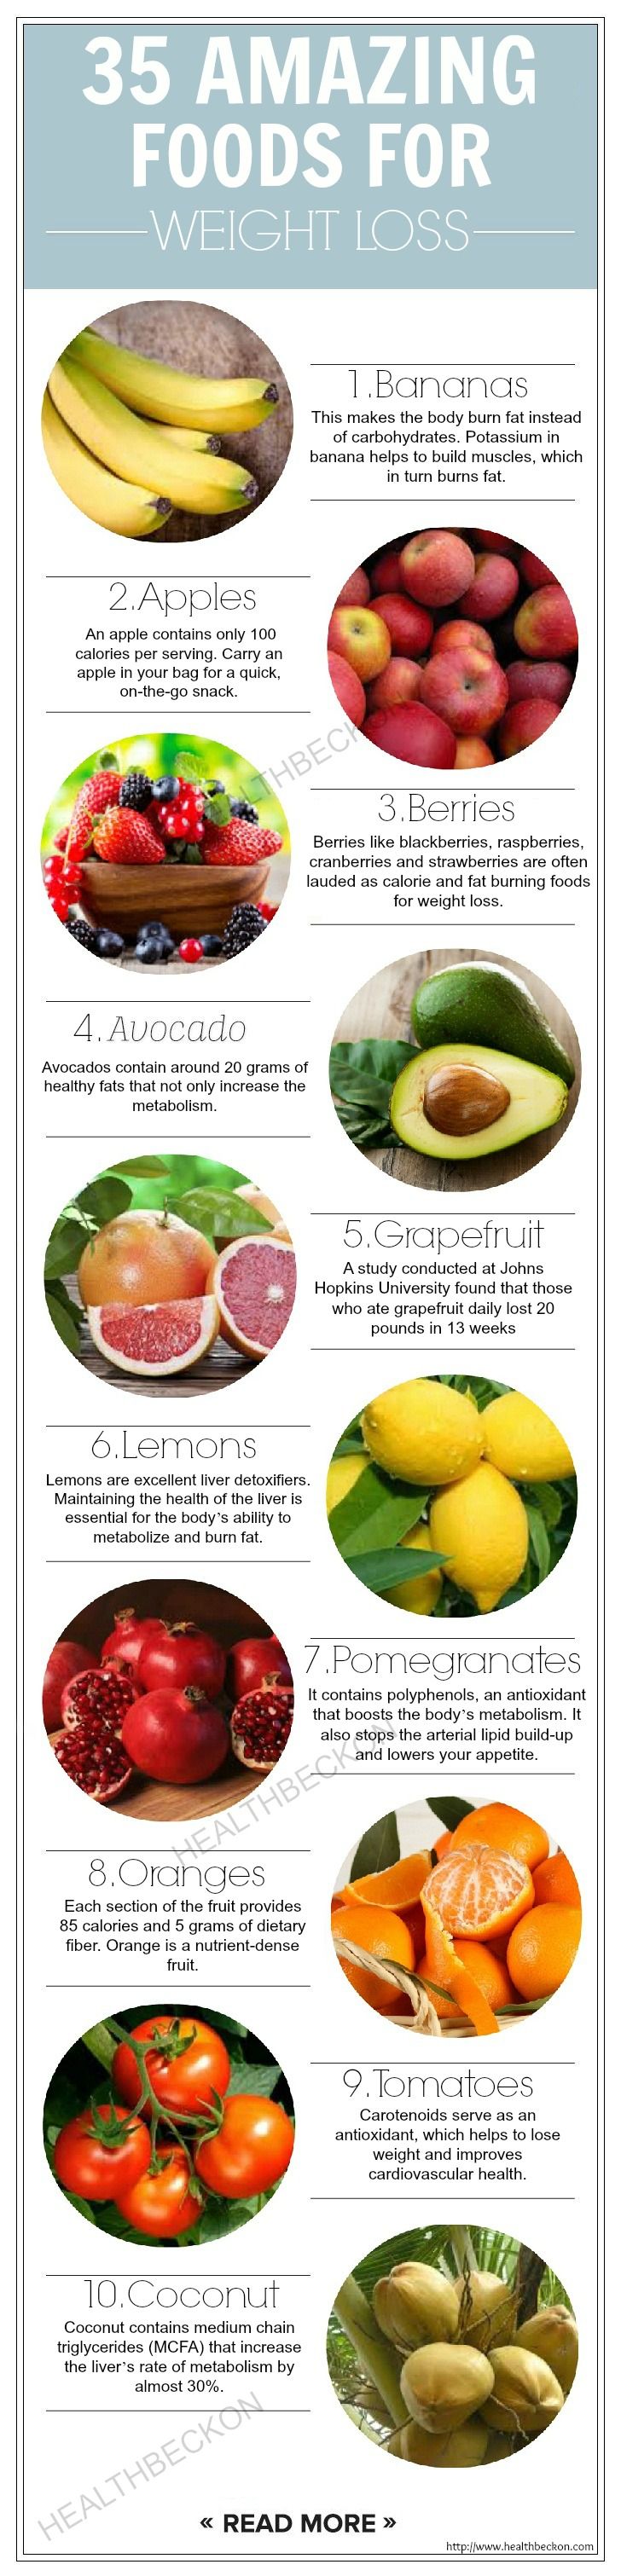 35 Amazing Foods For Weight Loss